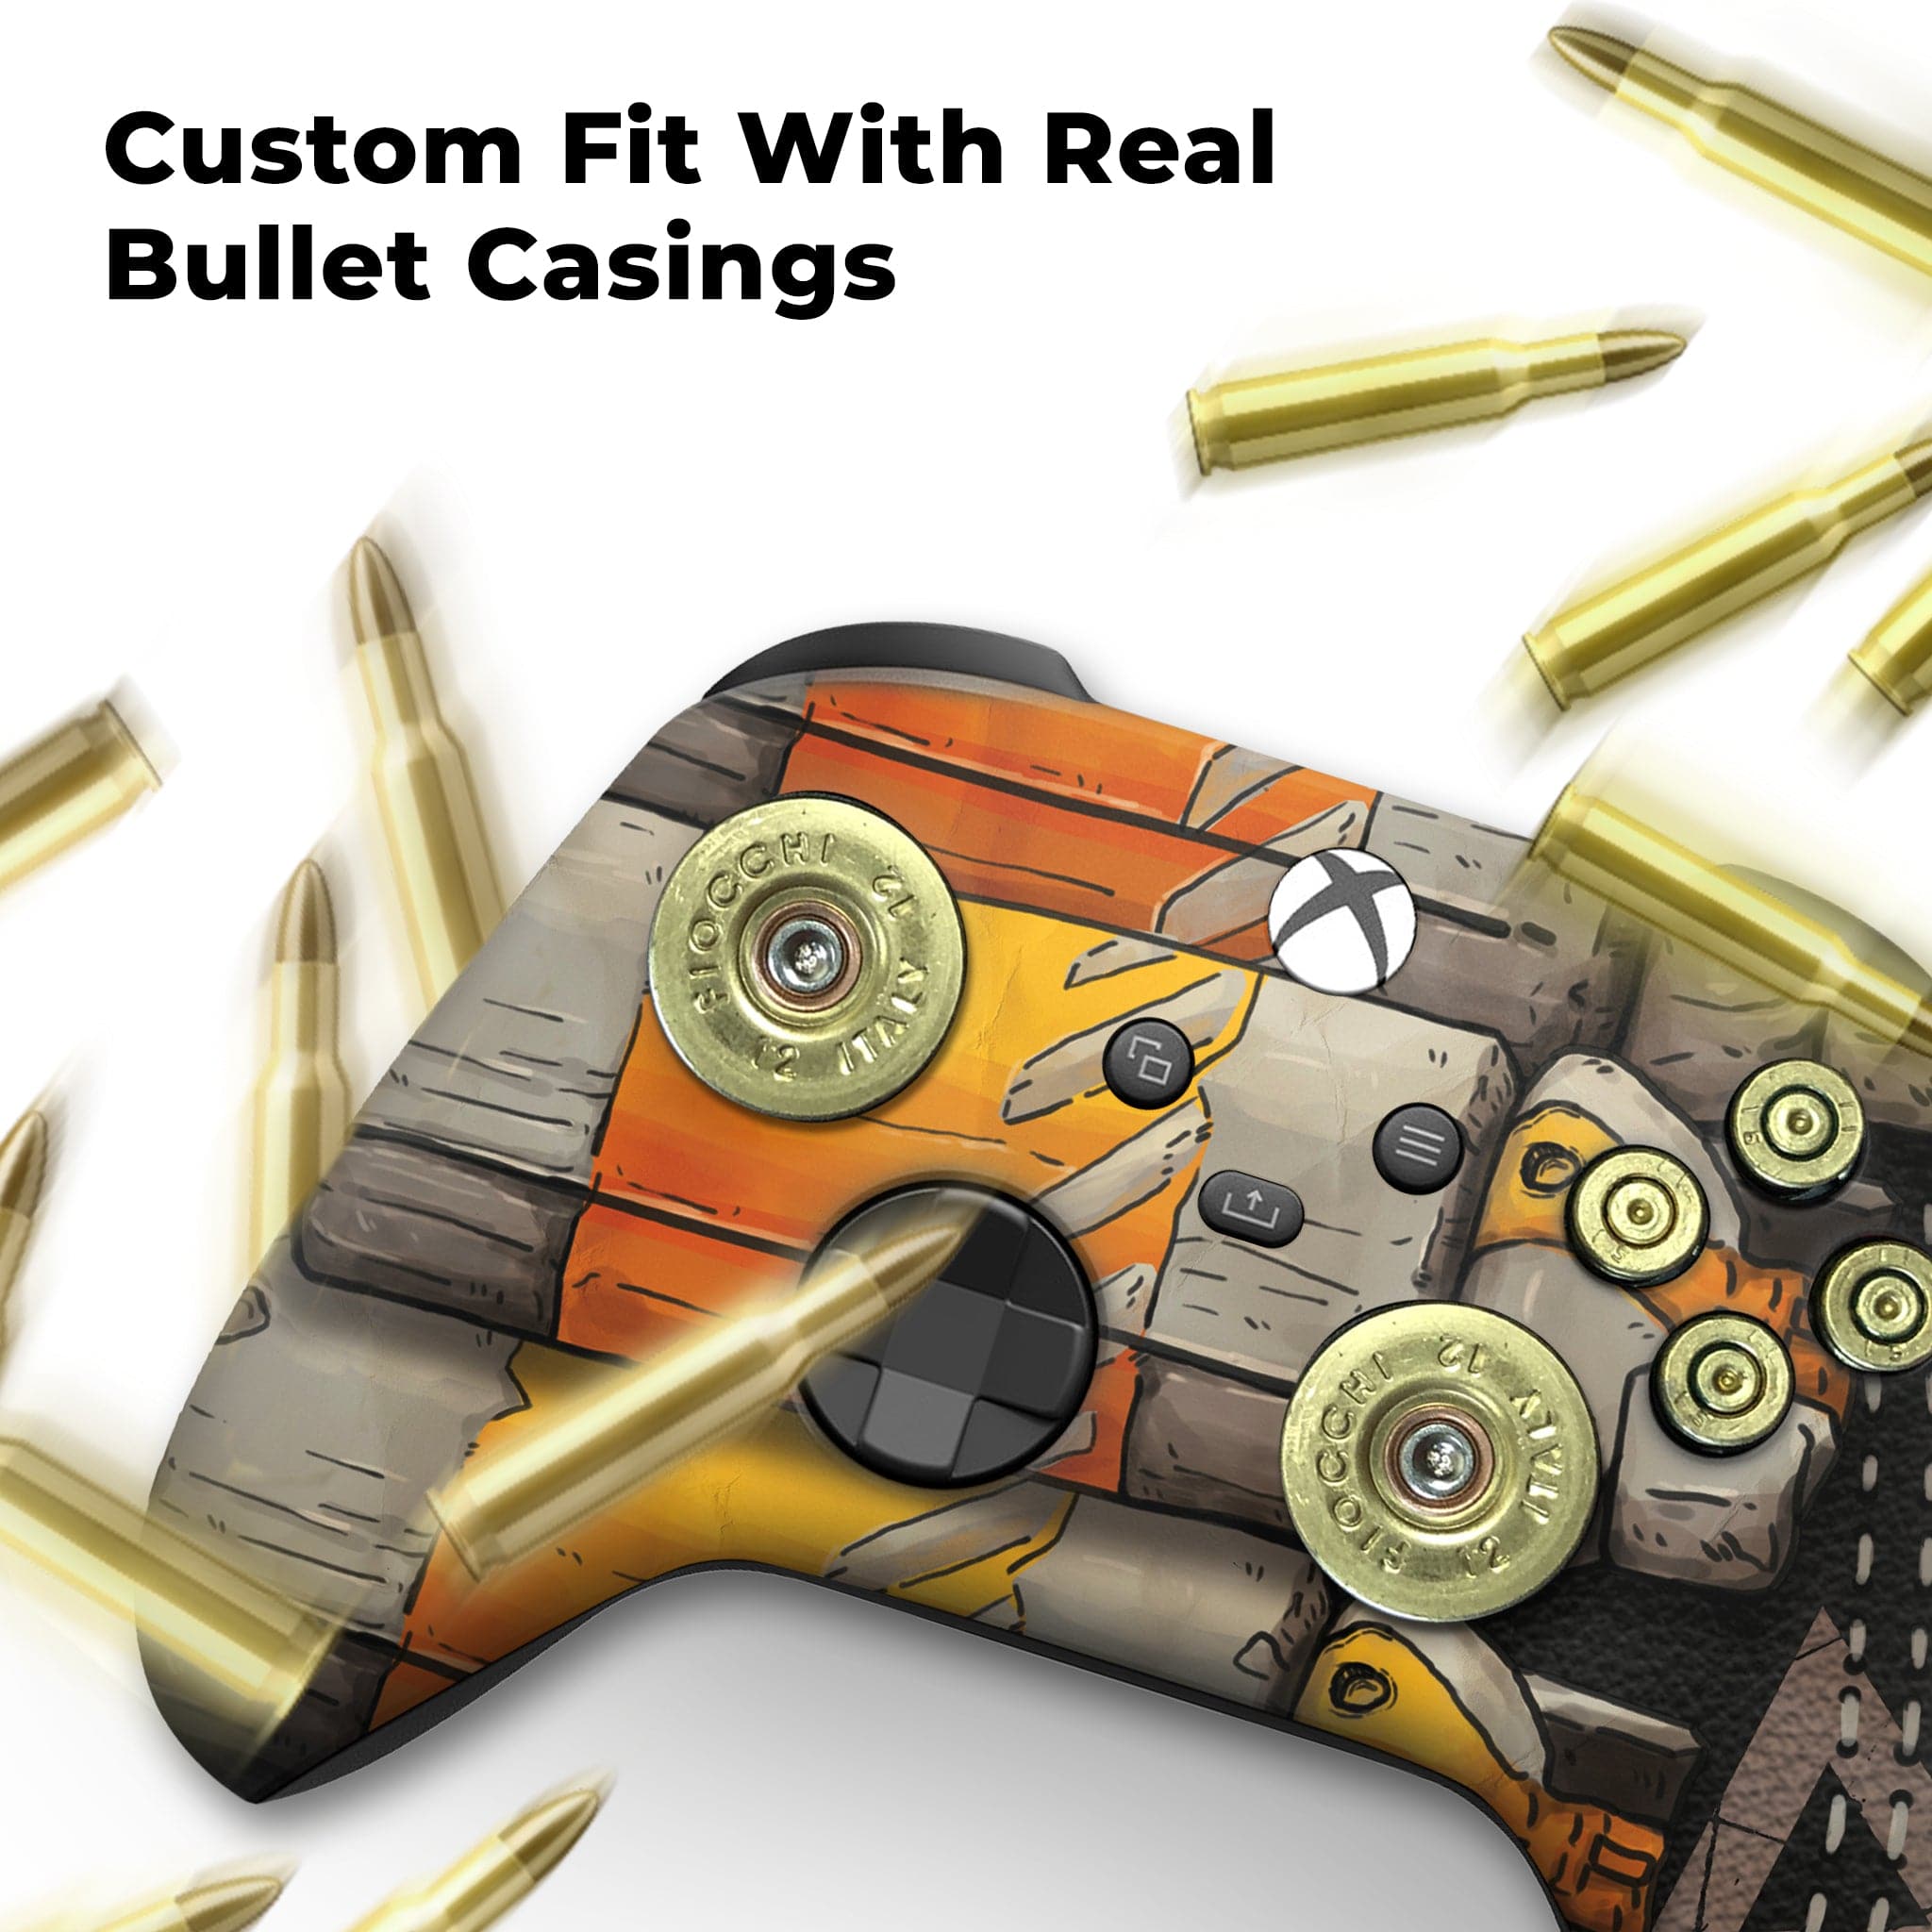 APEX BANGALORE inspired xbox x series controller with bullet buttons